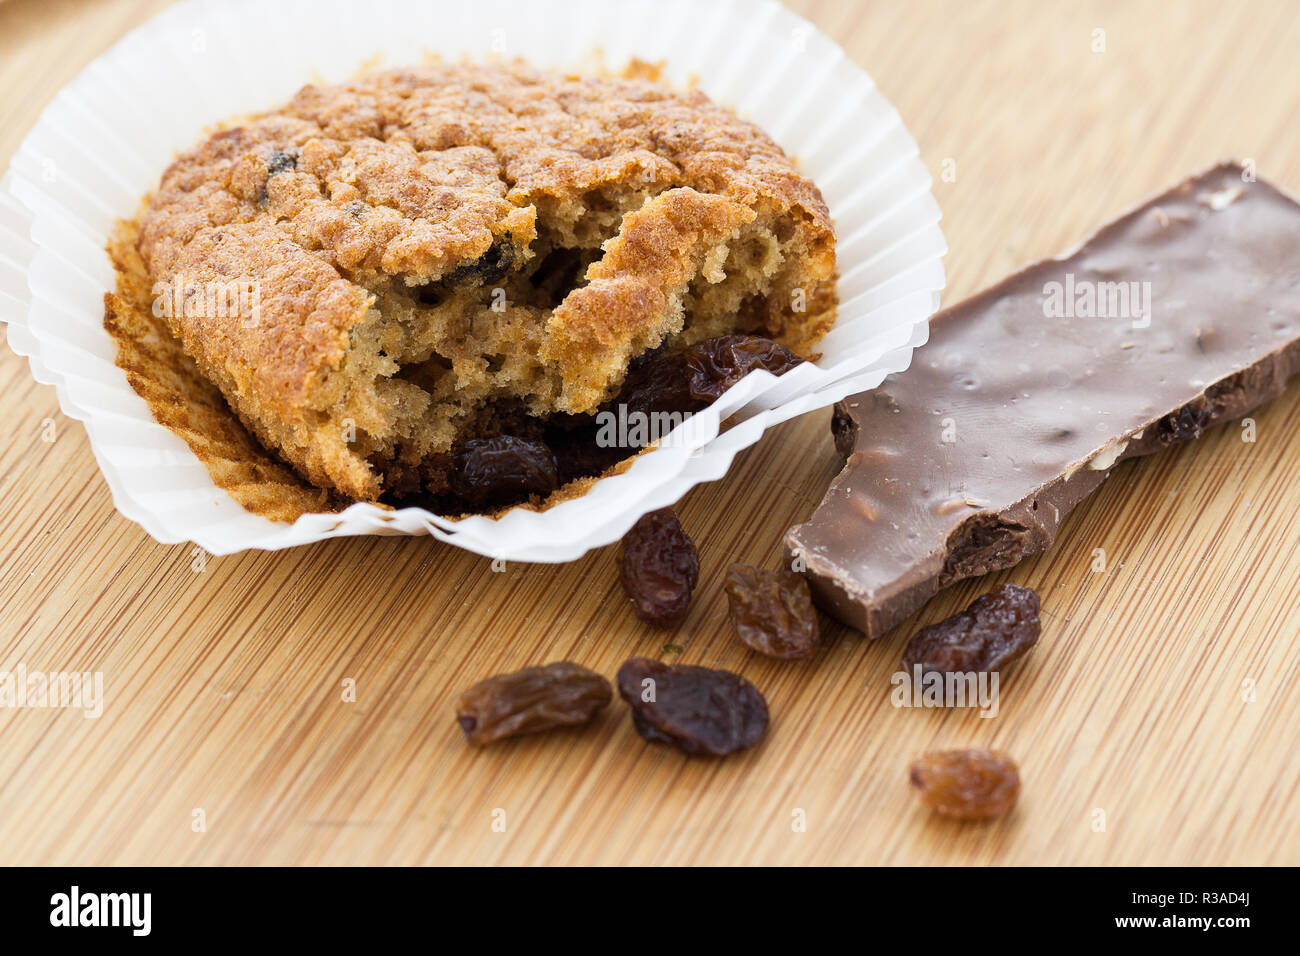 a bitten chocolate biscuit in a white paper form lies on a wooden background,together with raisins and a piece of chocolate. Stock Photo